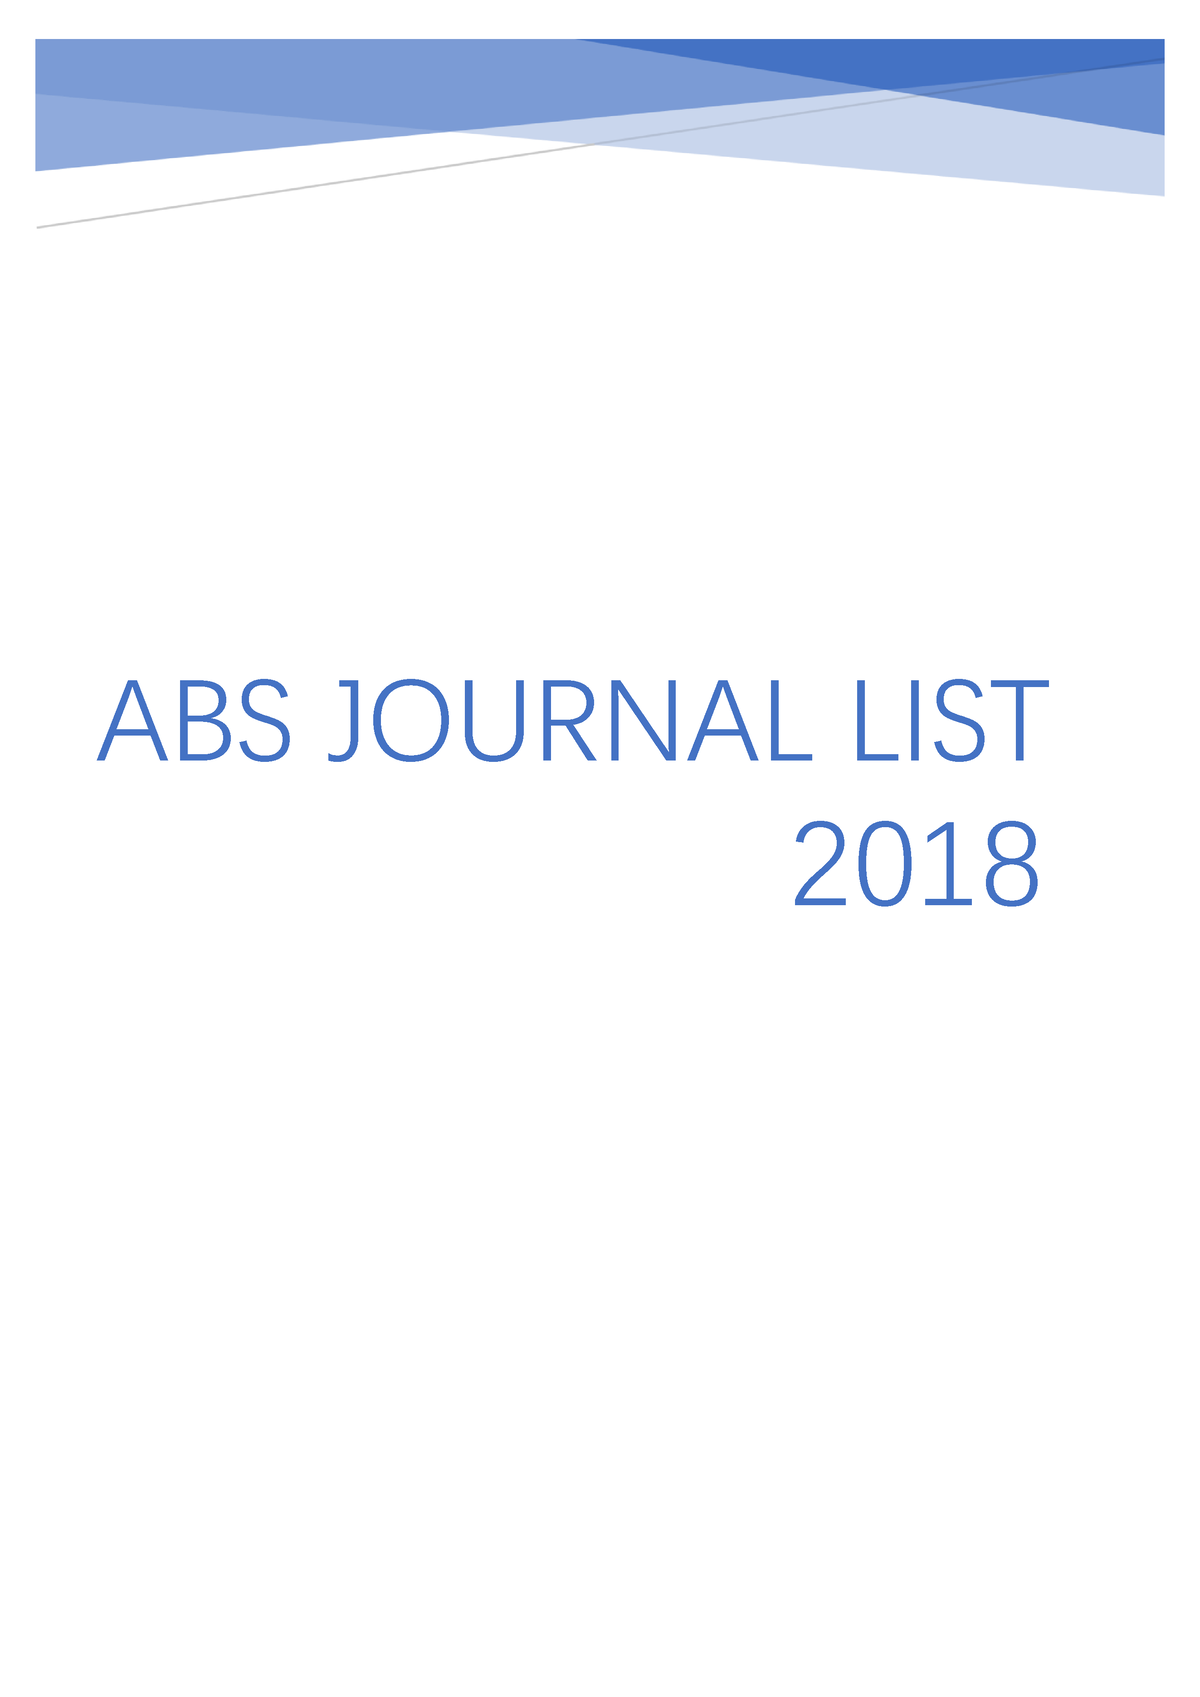 ABS list ABS List ABS JOURNAL LIST 2018 CONTENTS Accounting